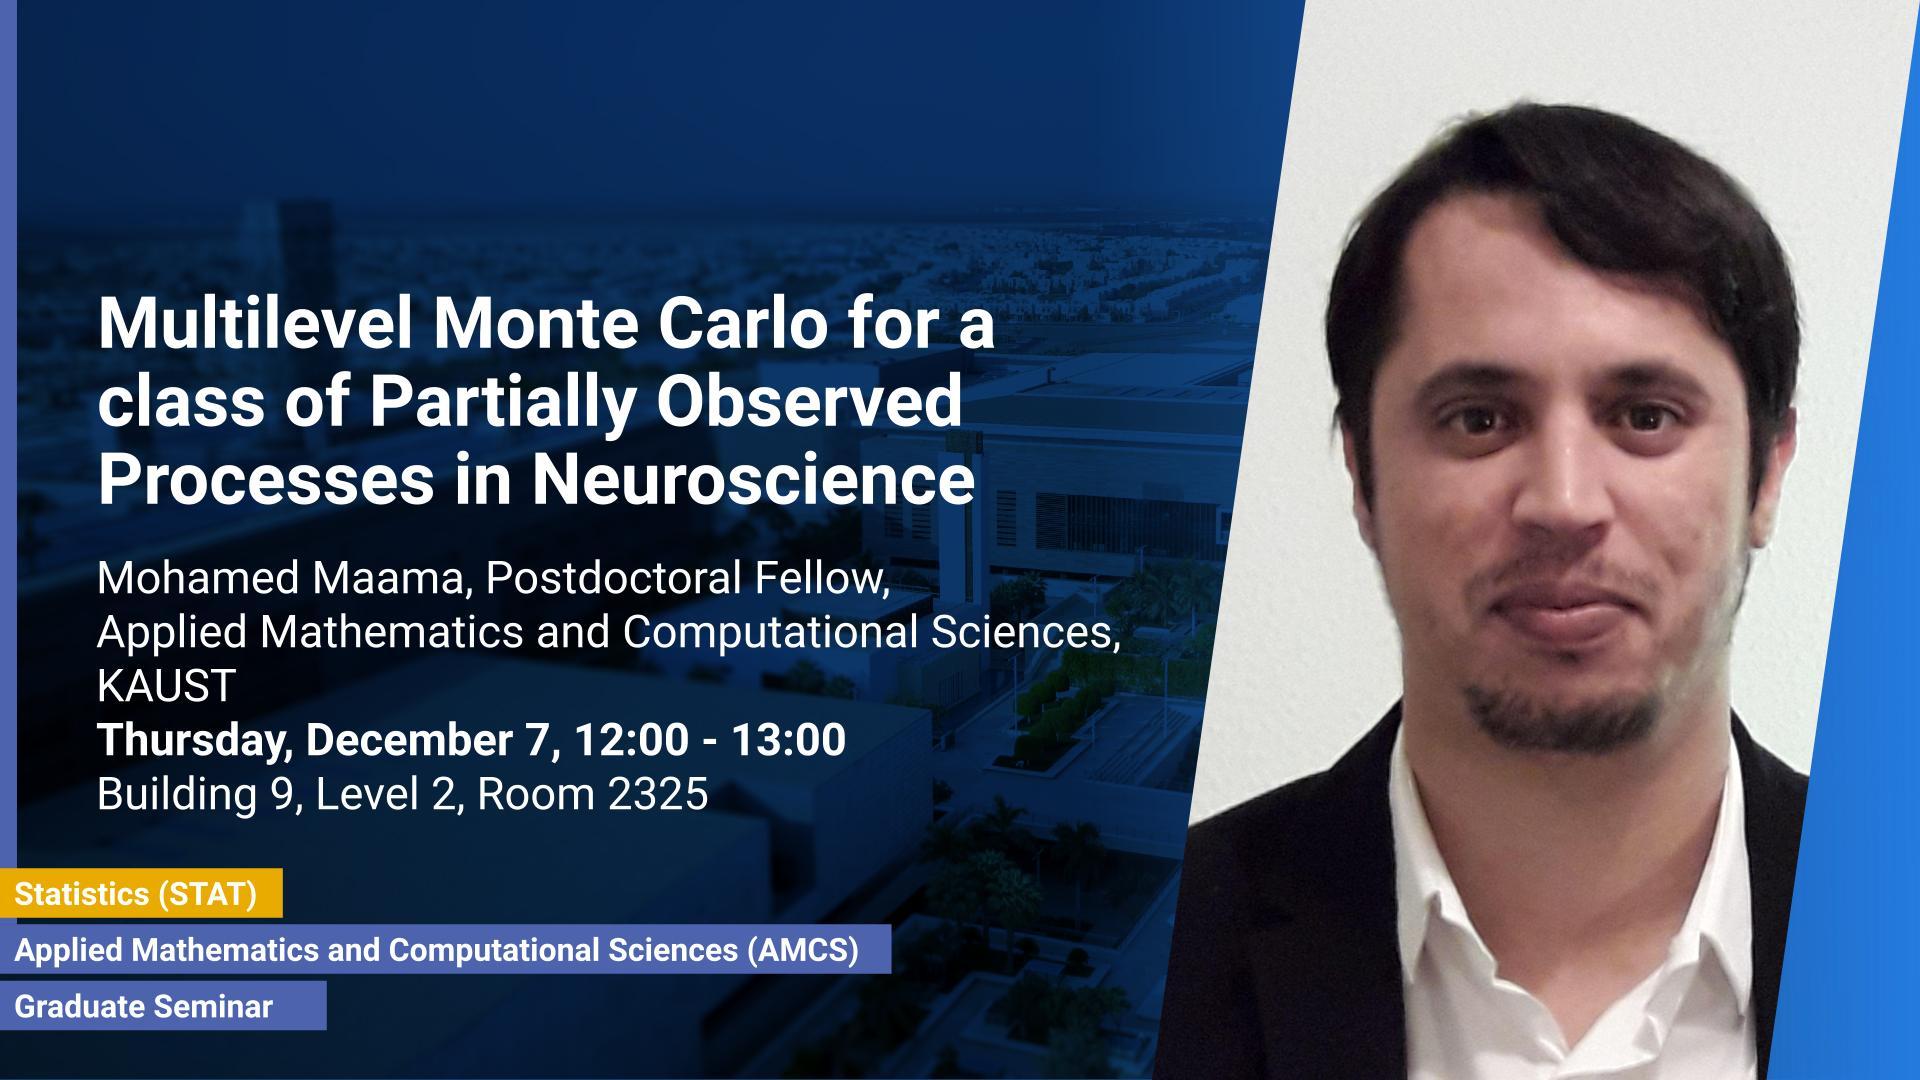 KAUST-CEMSE-AMCS-STAT-Graduate- Seminar- Mohamed-Maama-Multilevel Monte Carlo for a class of Partially Observed Processes in Neuroscience